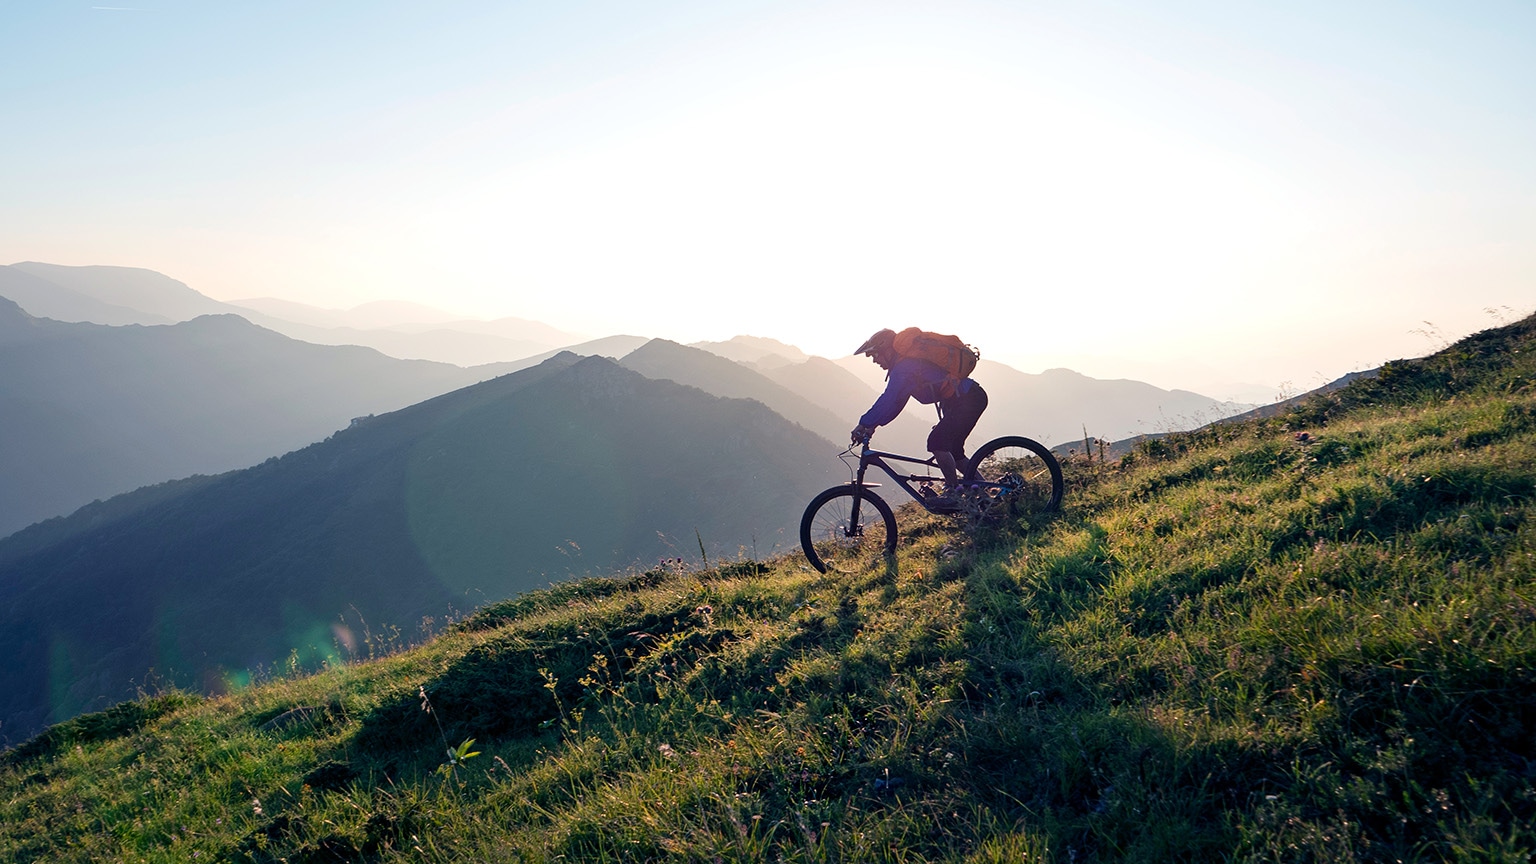 Image of a someone on mountain bike riding down a verdant green slope with mountains in the background.